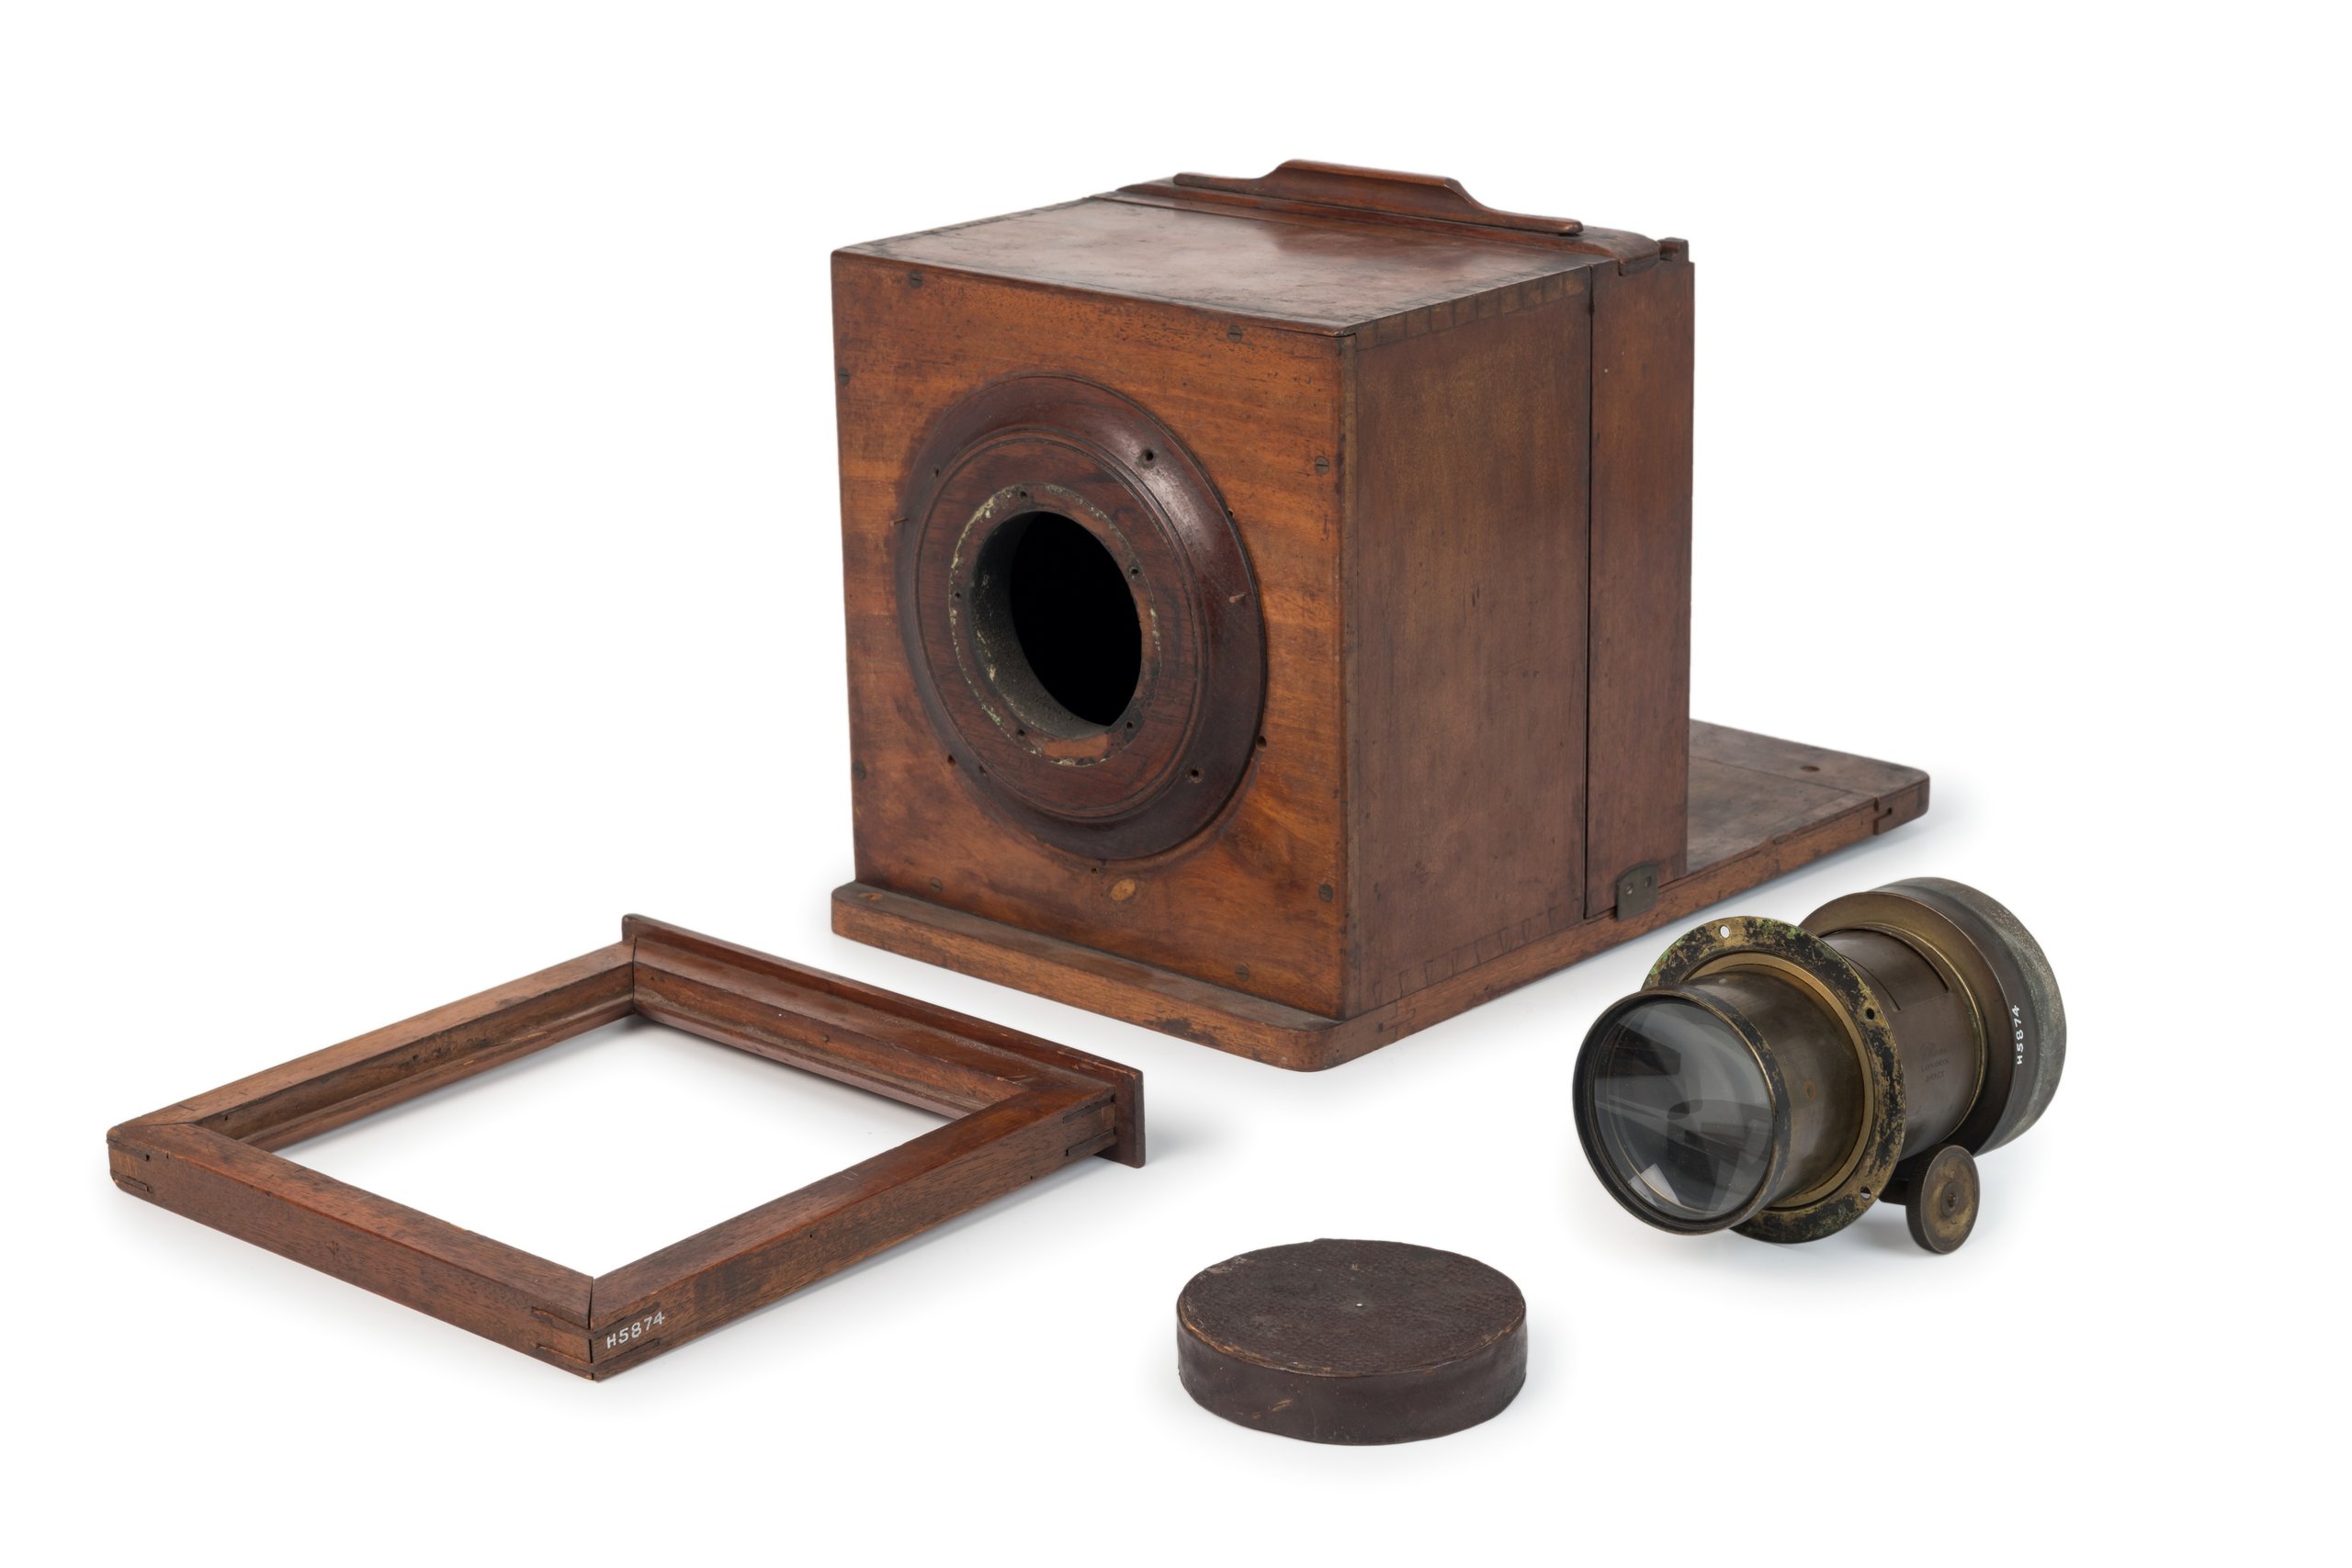 Field camera with lens made by Ross & Co